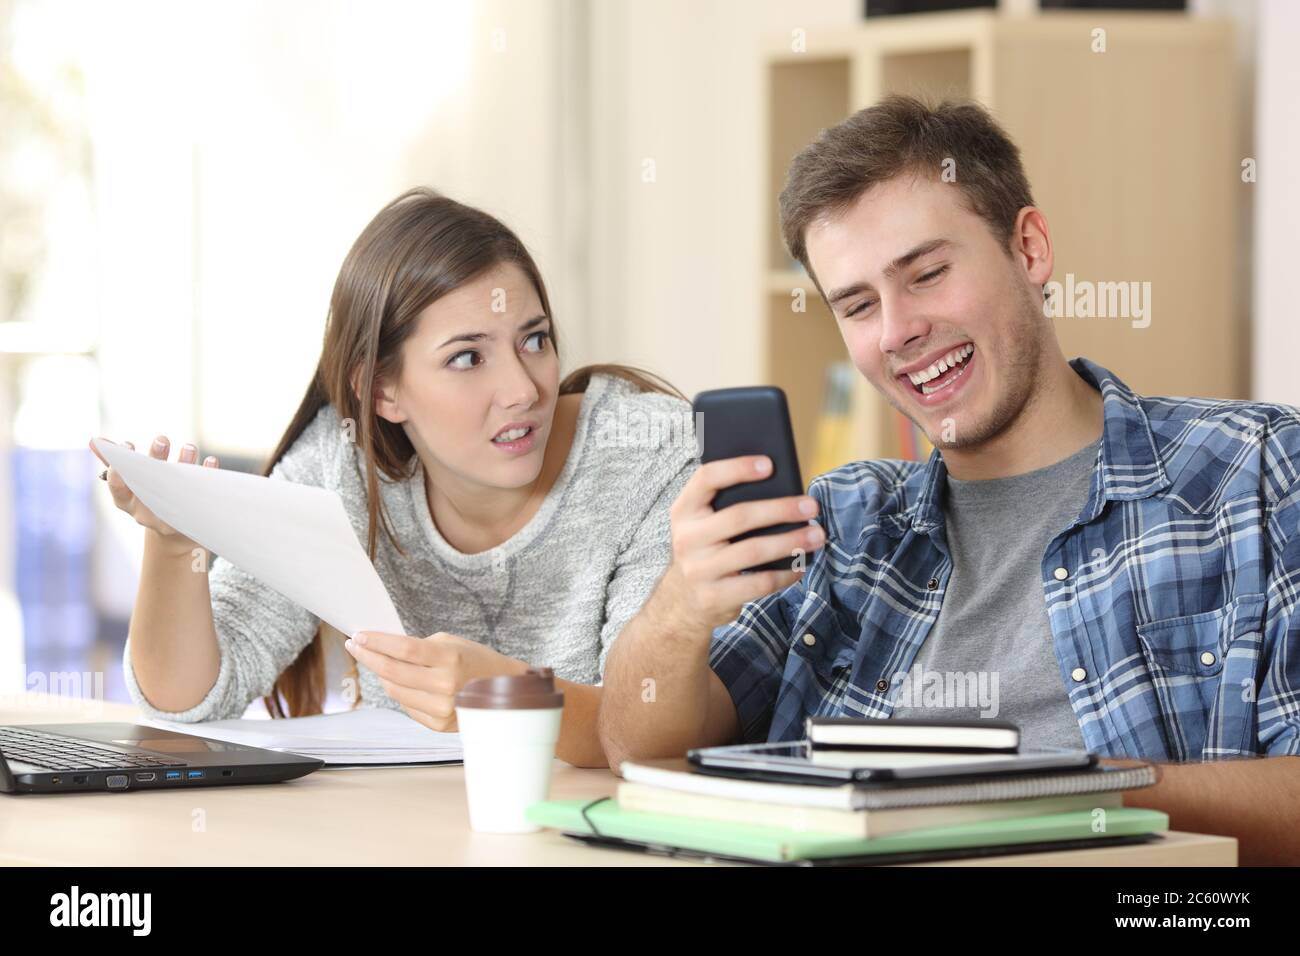 Angry student girl complaining showing homework to slacker classmate boy checking smartphone sitting on a desk at home Stock Photo